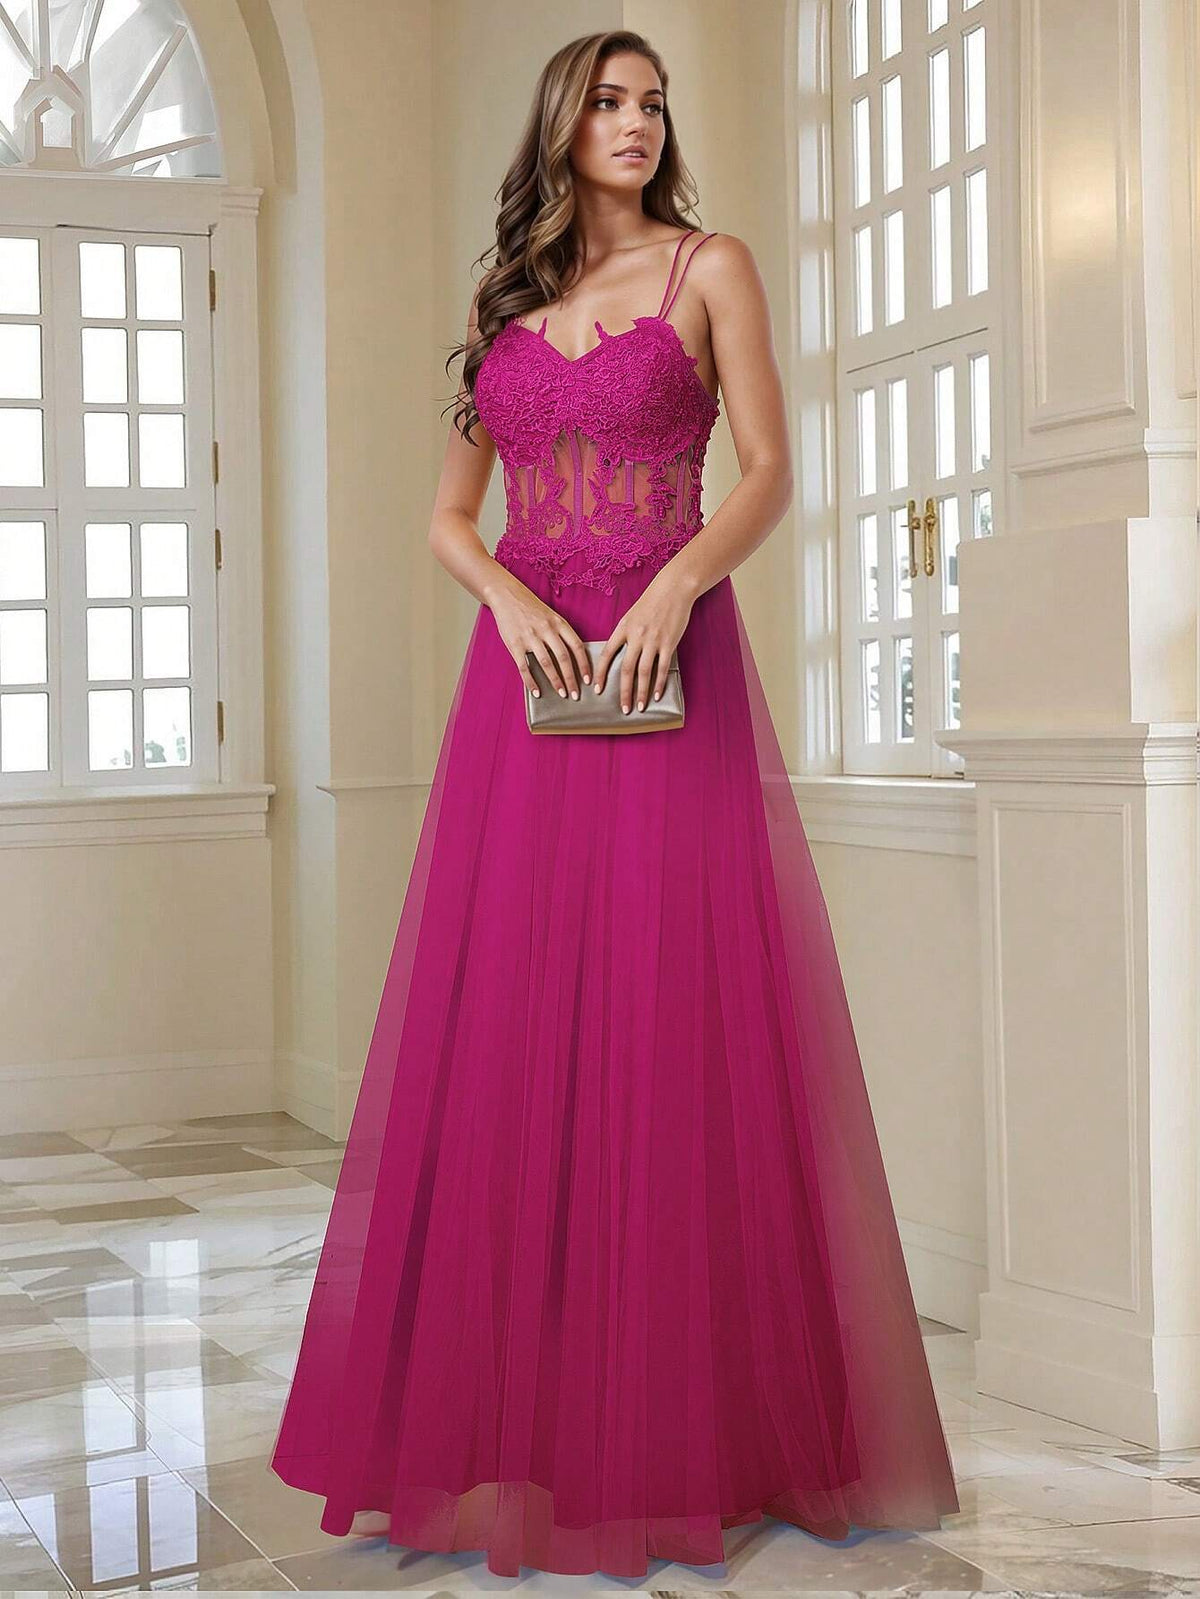 HOMEYEE Lace Mesh Patchwork Beaded Cocktail Evening Dress, Sexy And Elegant, Perfect For Weddings, Bridesmaids, Parties